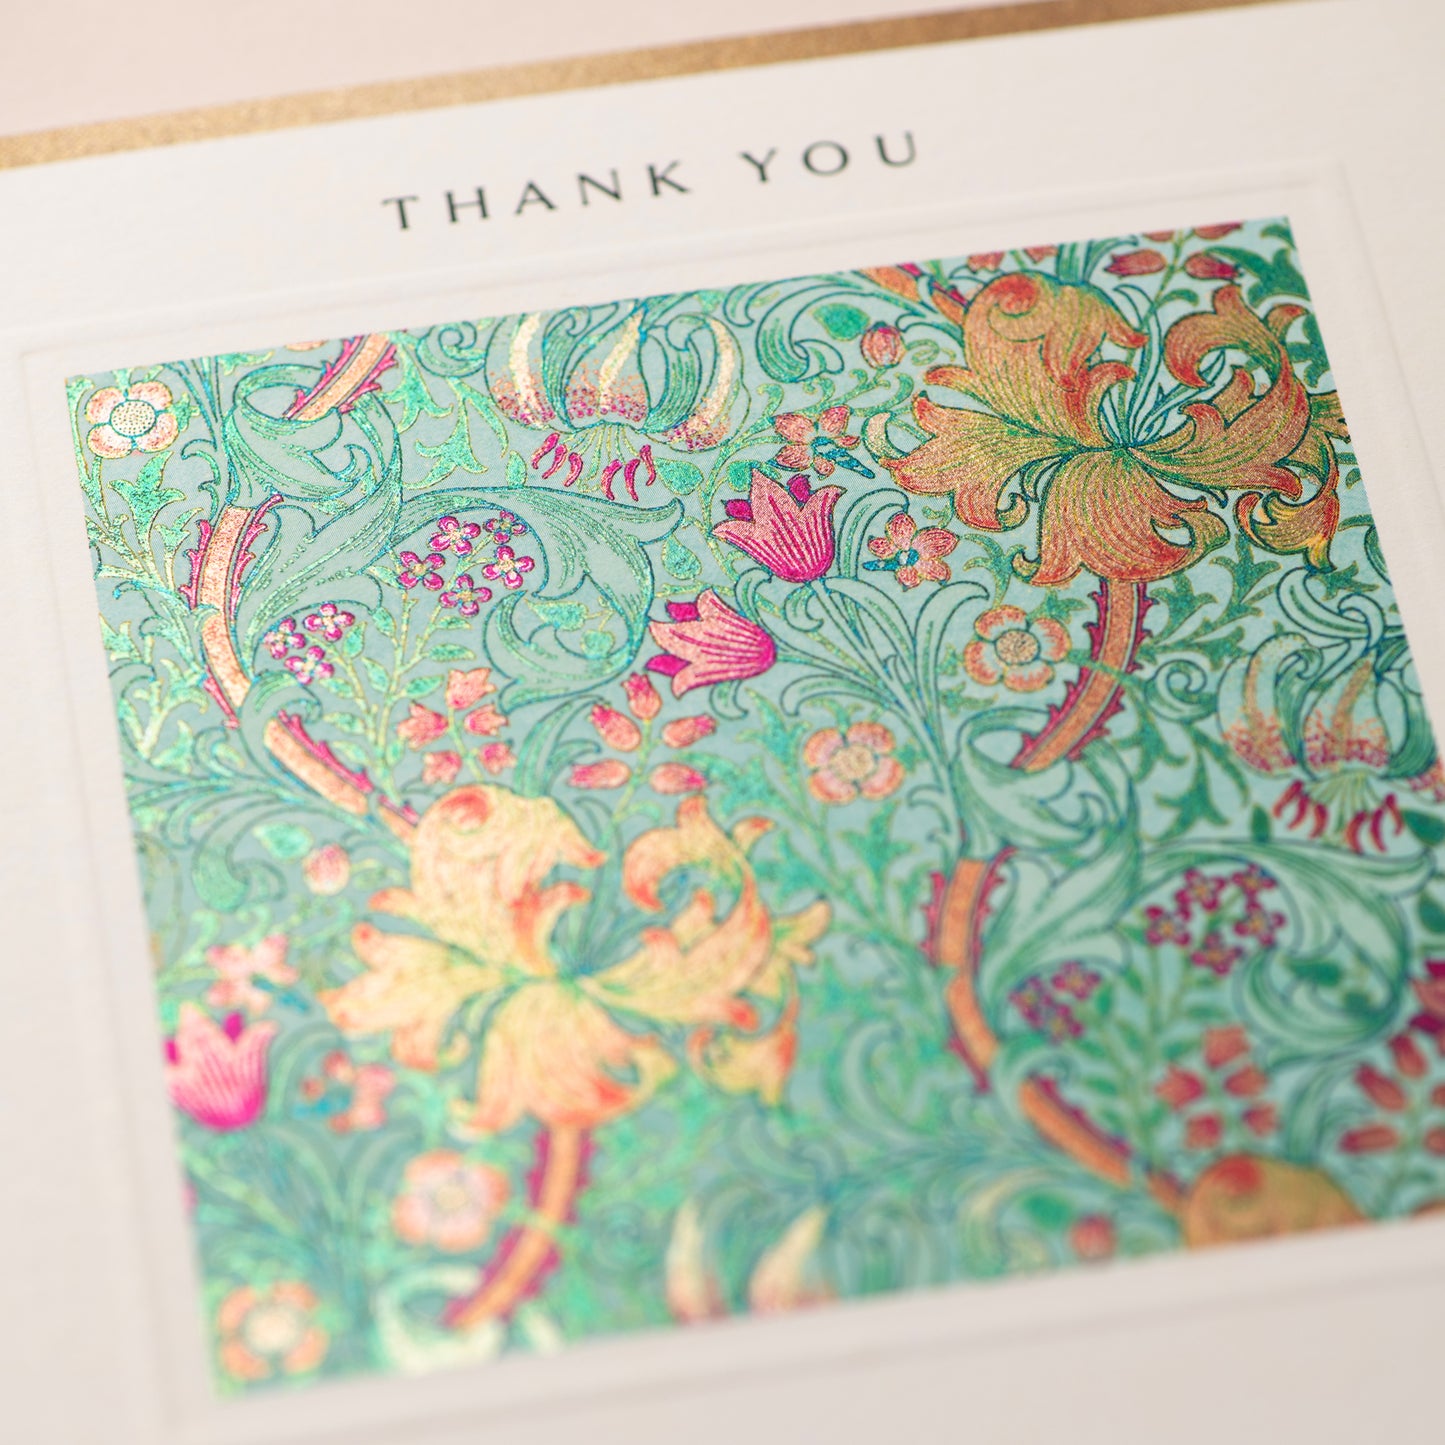 Flowers Thank You Card